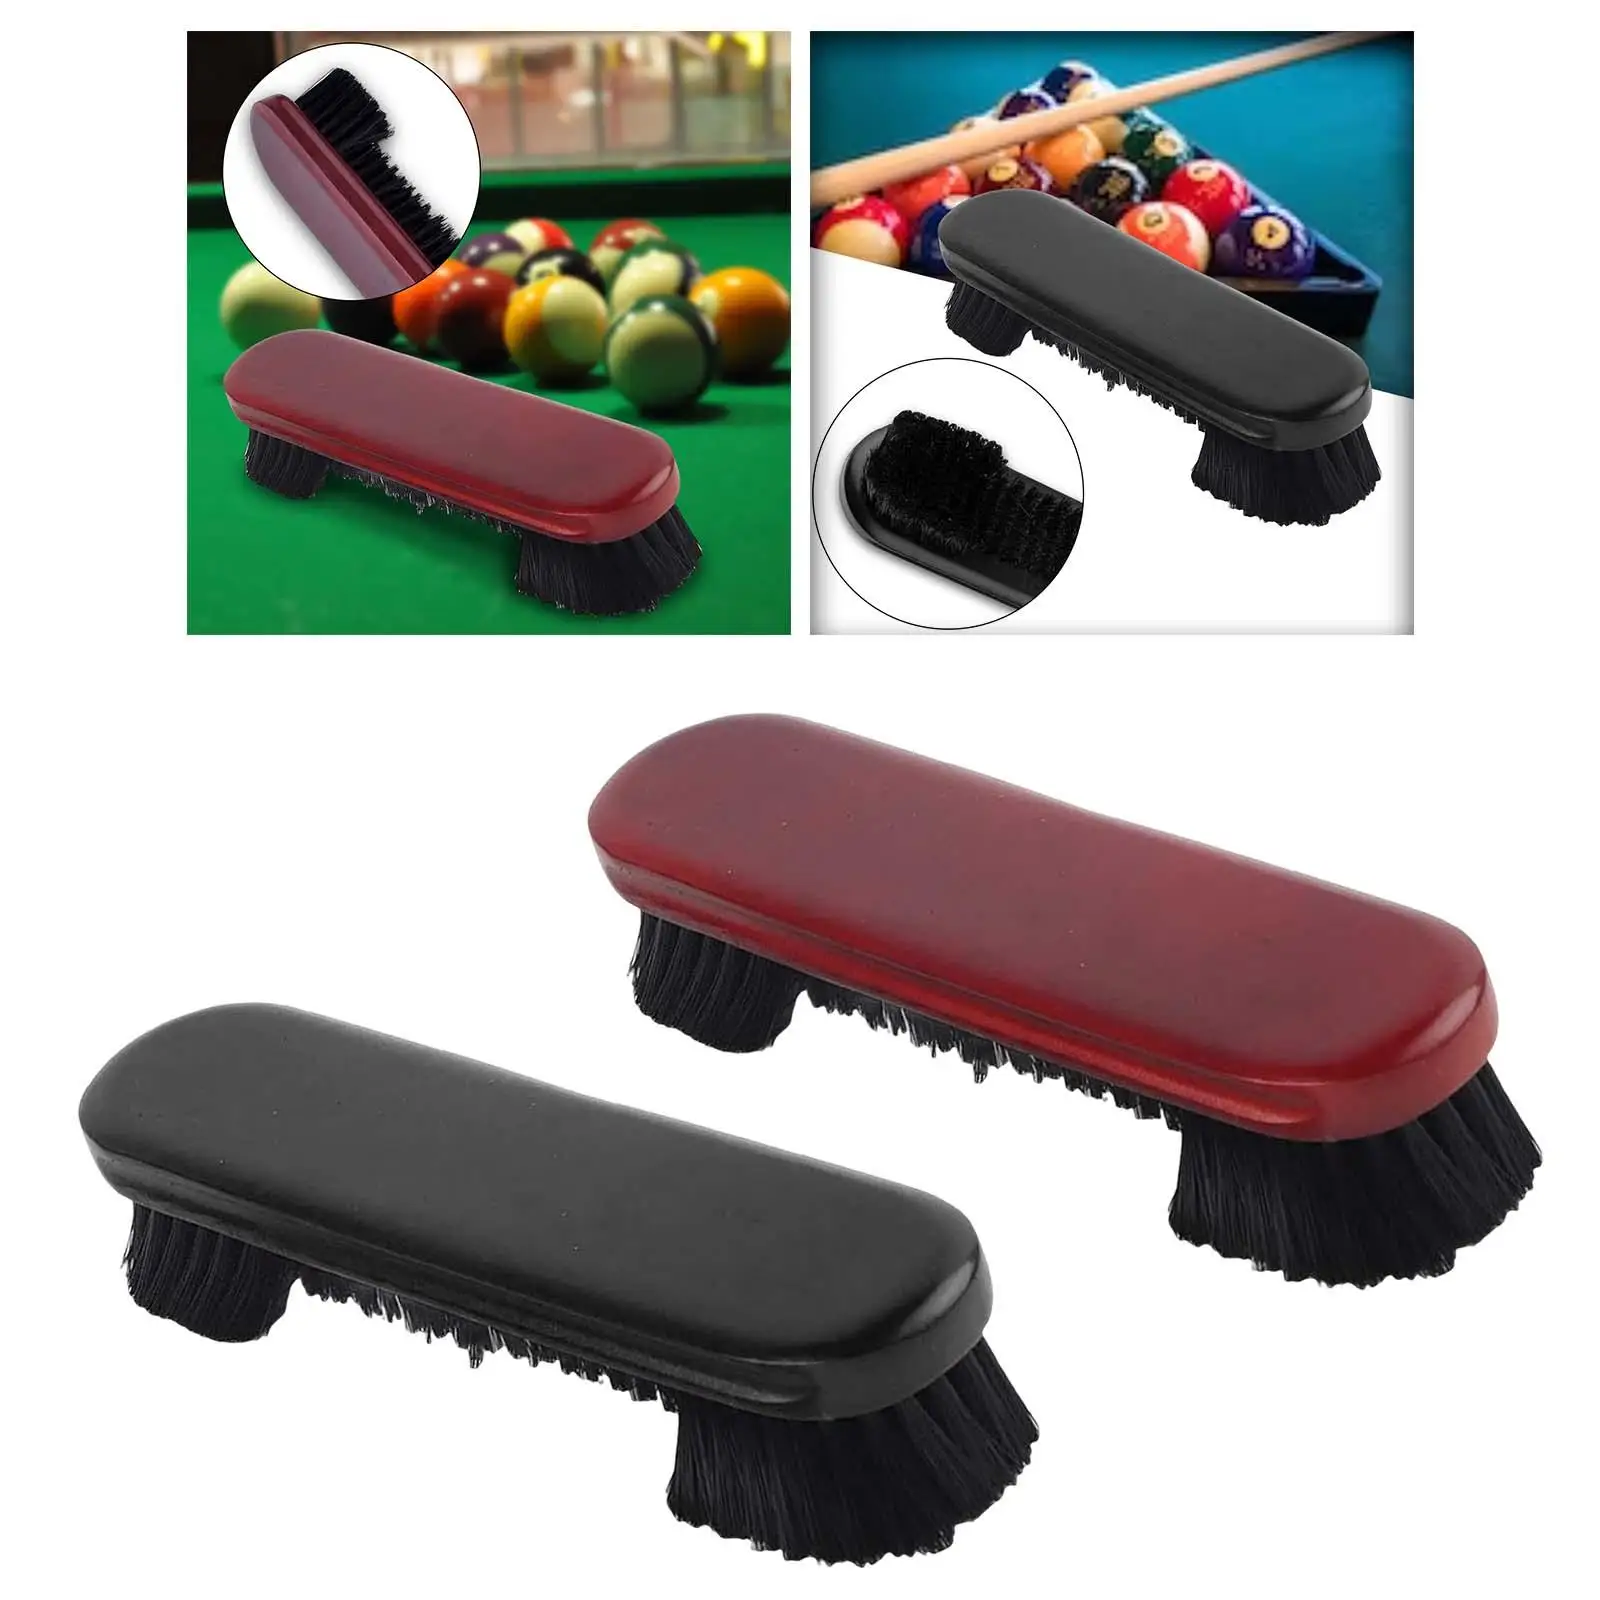 Wooden Billiard Pool Table Brush Cleaning Tool PVC Bristles Premium Cleaning Brush Cleaner 9 Inches Pool Snooker Accessories